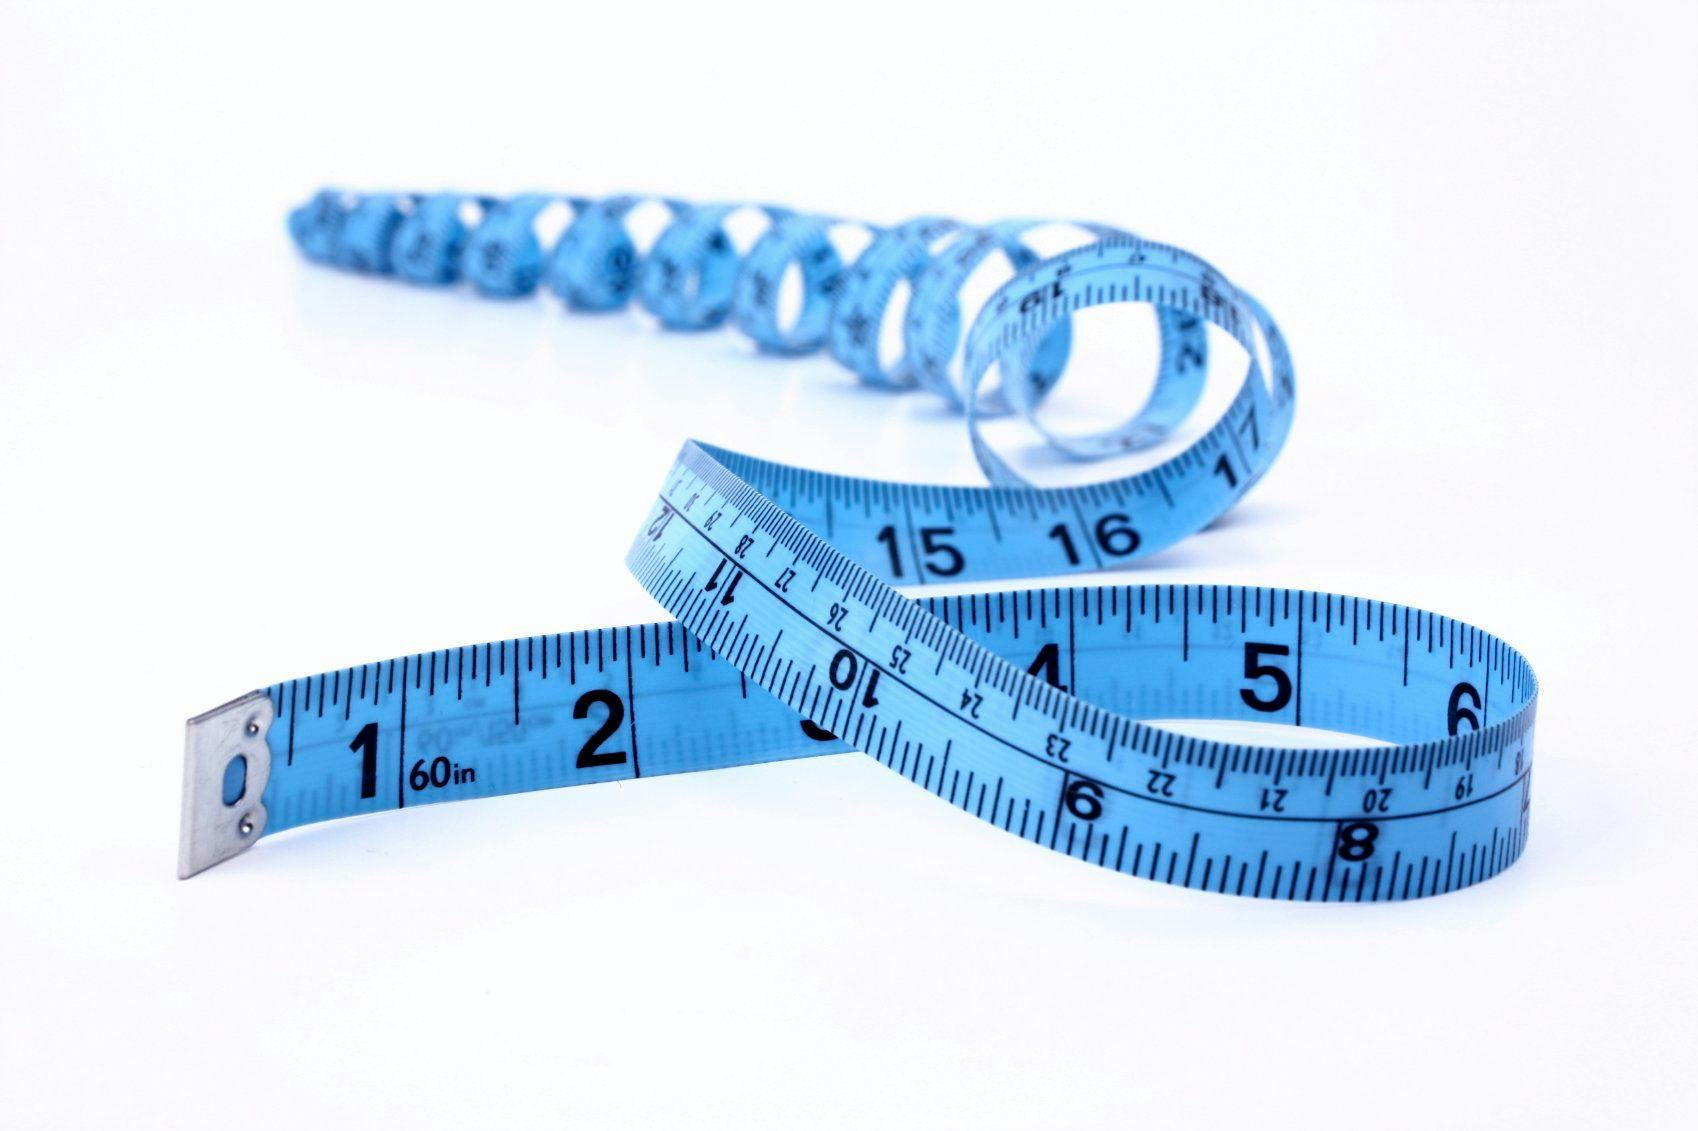 New Safety Data Published on ForsLean Weight-Management Ingredient